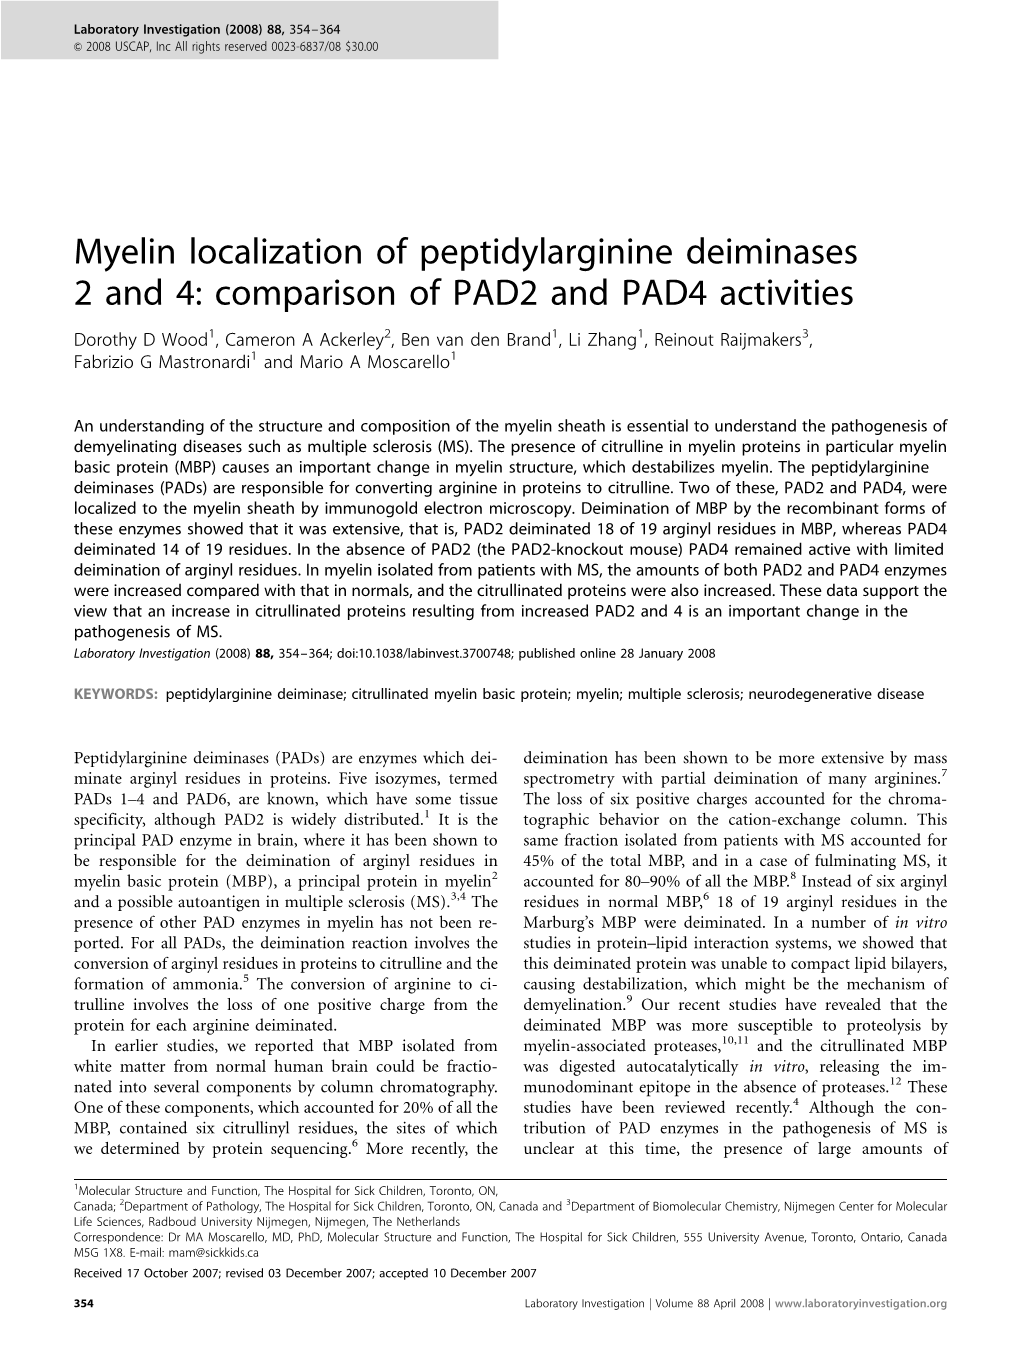 Myelin Localization of Peptidylarginine Deiminases 2 and 4: Comparison of PAD2 and PAD4 Activities